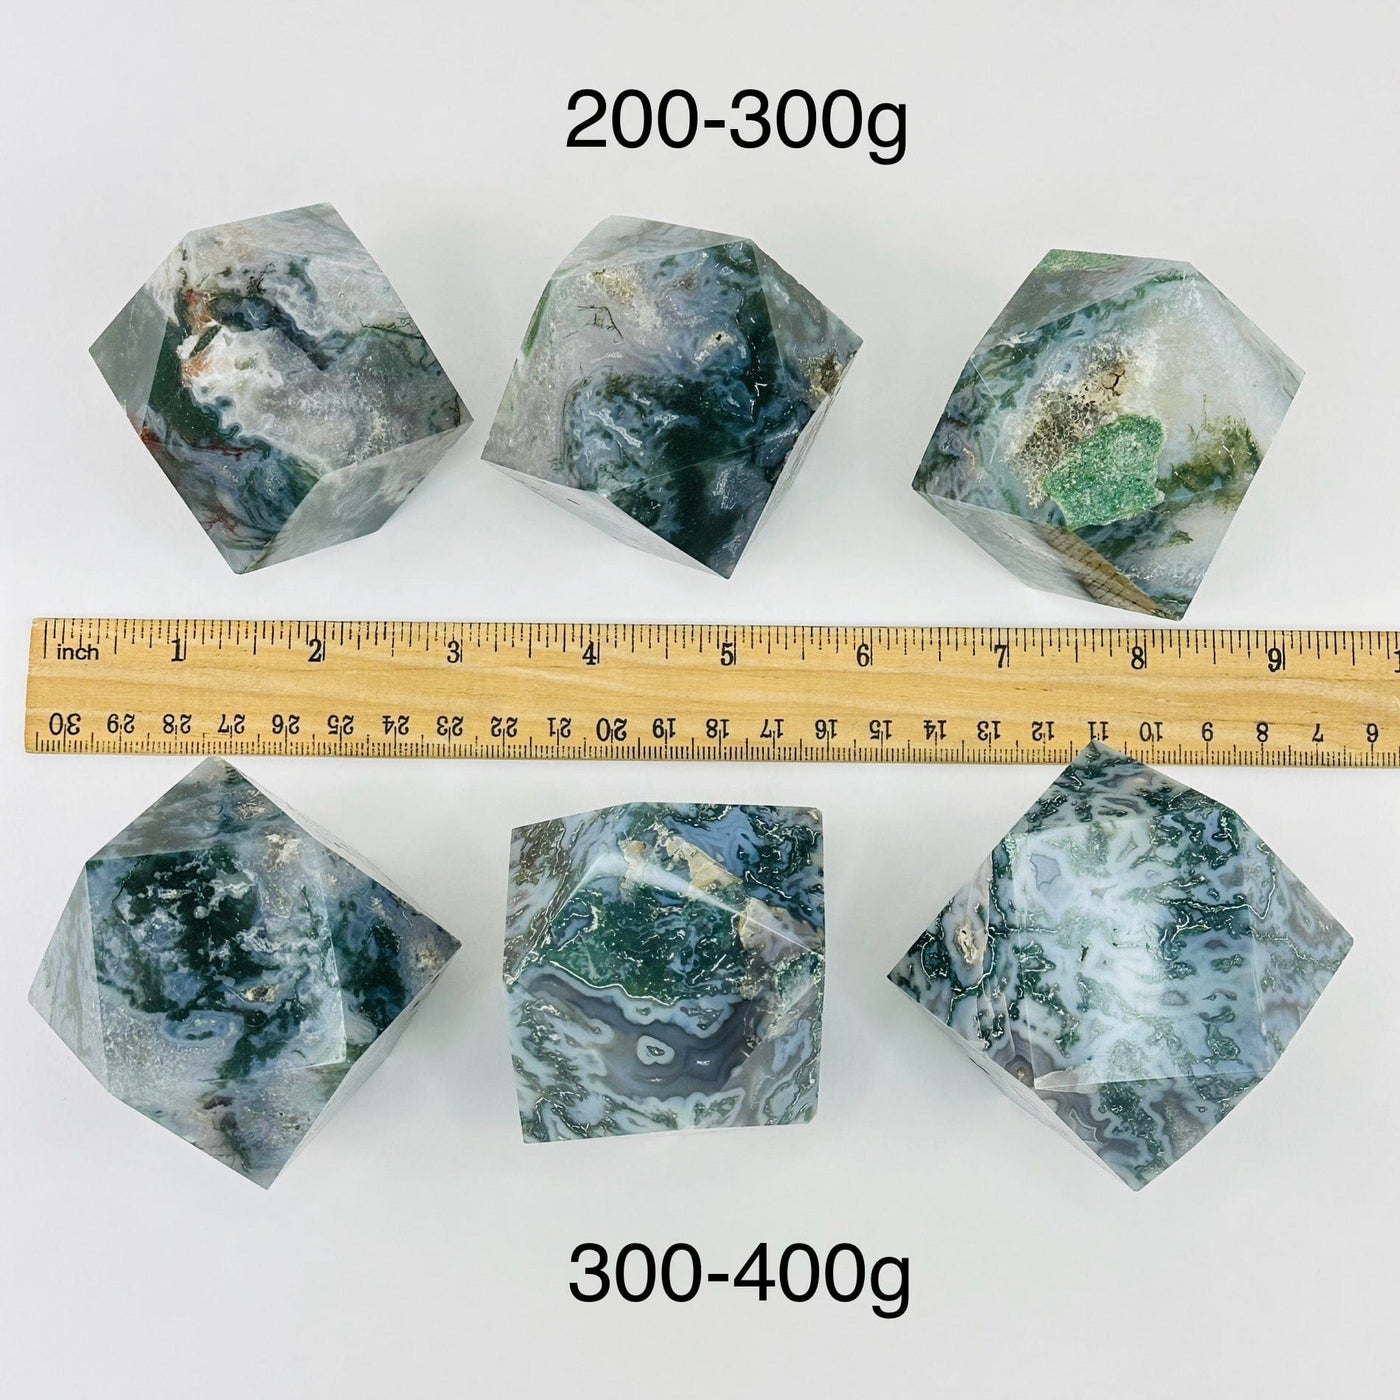 Moss Agate Geometric Shapes next to a ruler for size reference 